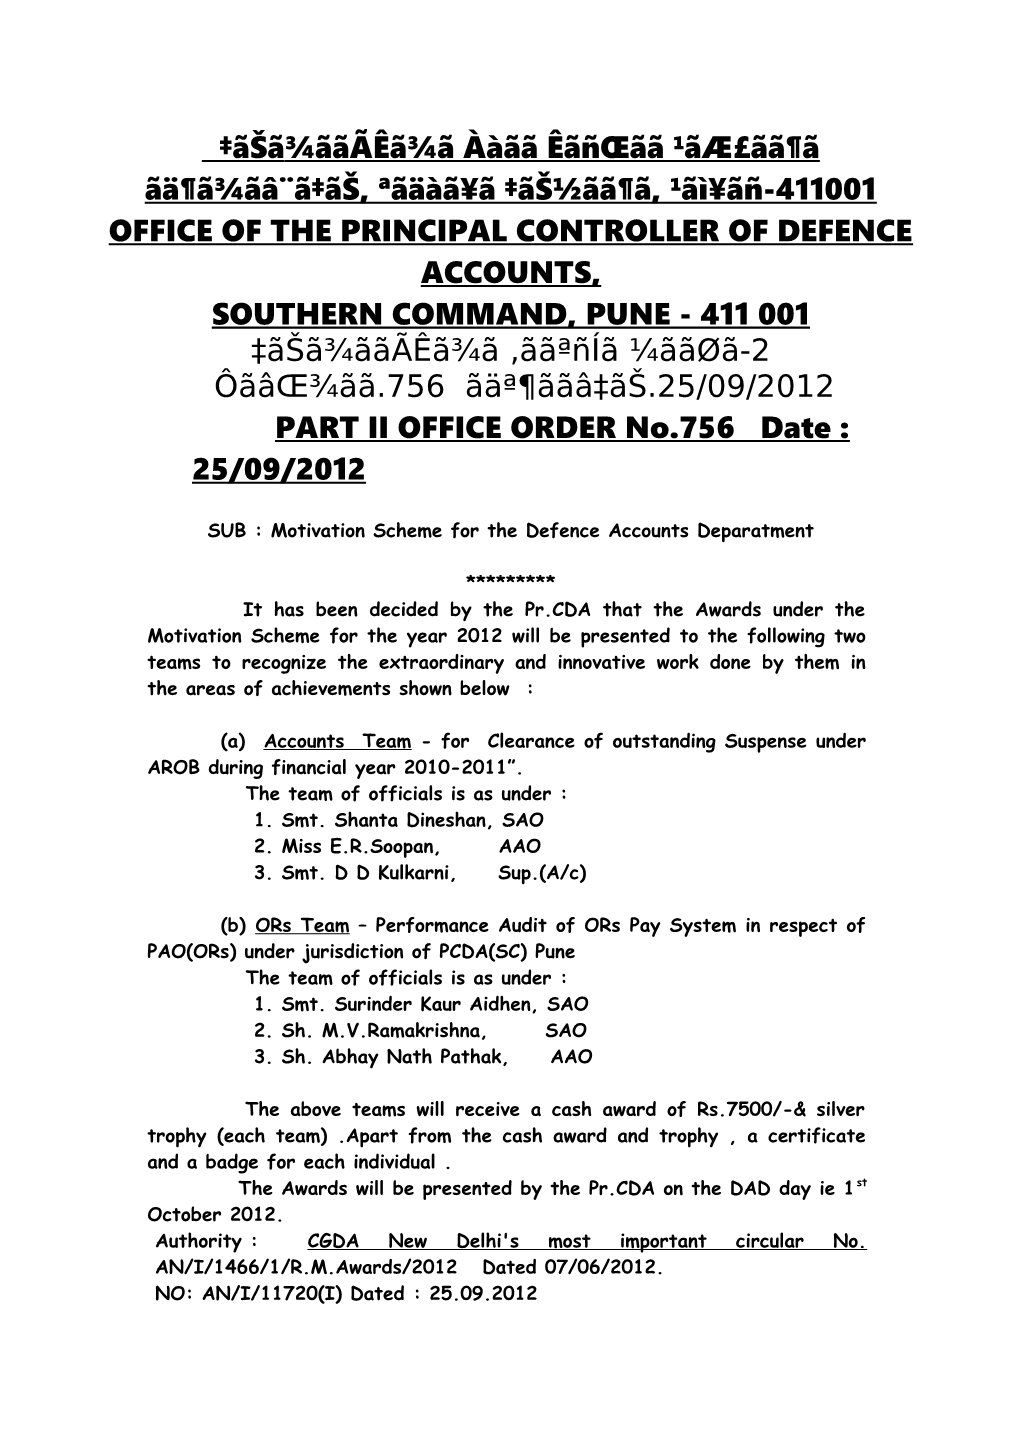 Office of the Principal Controller of Defence Accounts